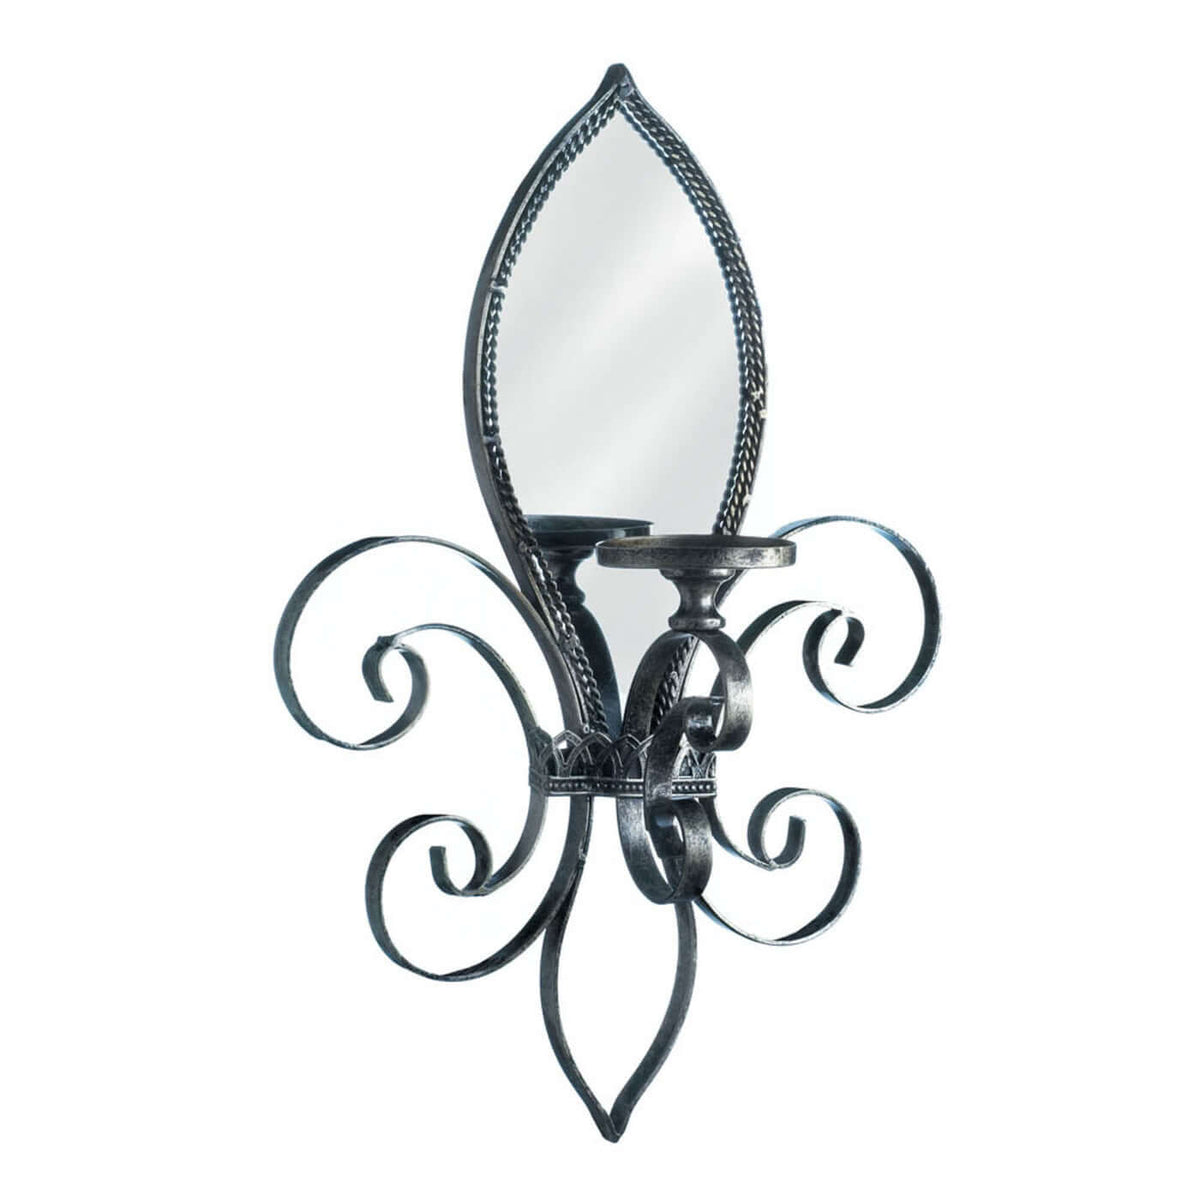 Fleur-de-lis Mirrored Wall Sconce - The House of Awareness